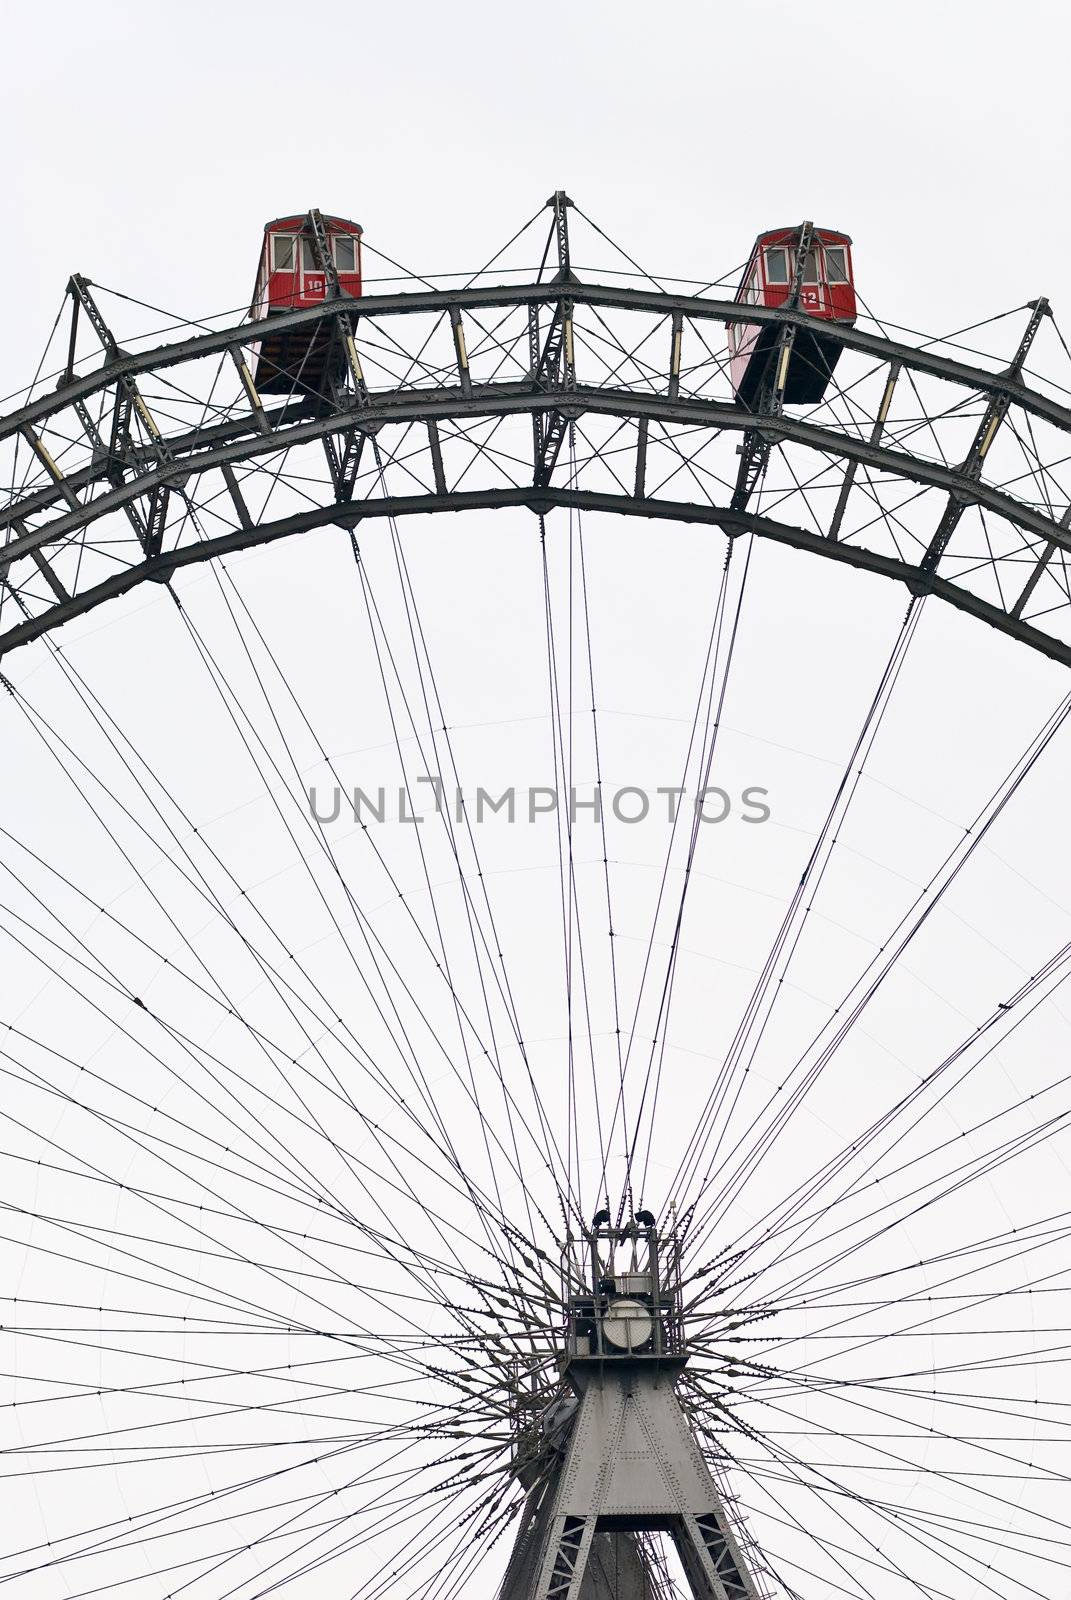 the viennese giant wheel is a ferris wheel in the famous austrian amusement park prater. it is about 60 meters high and was designed by walter basset